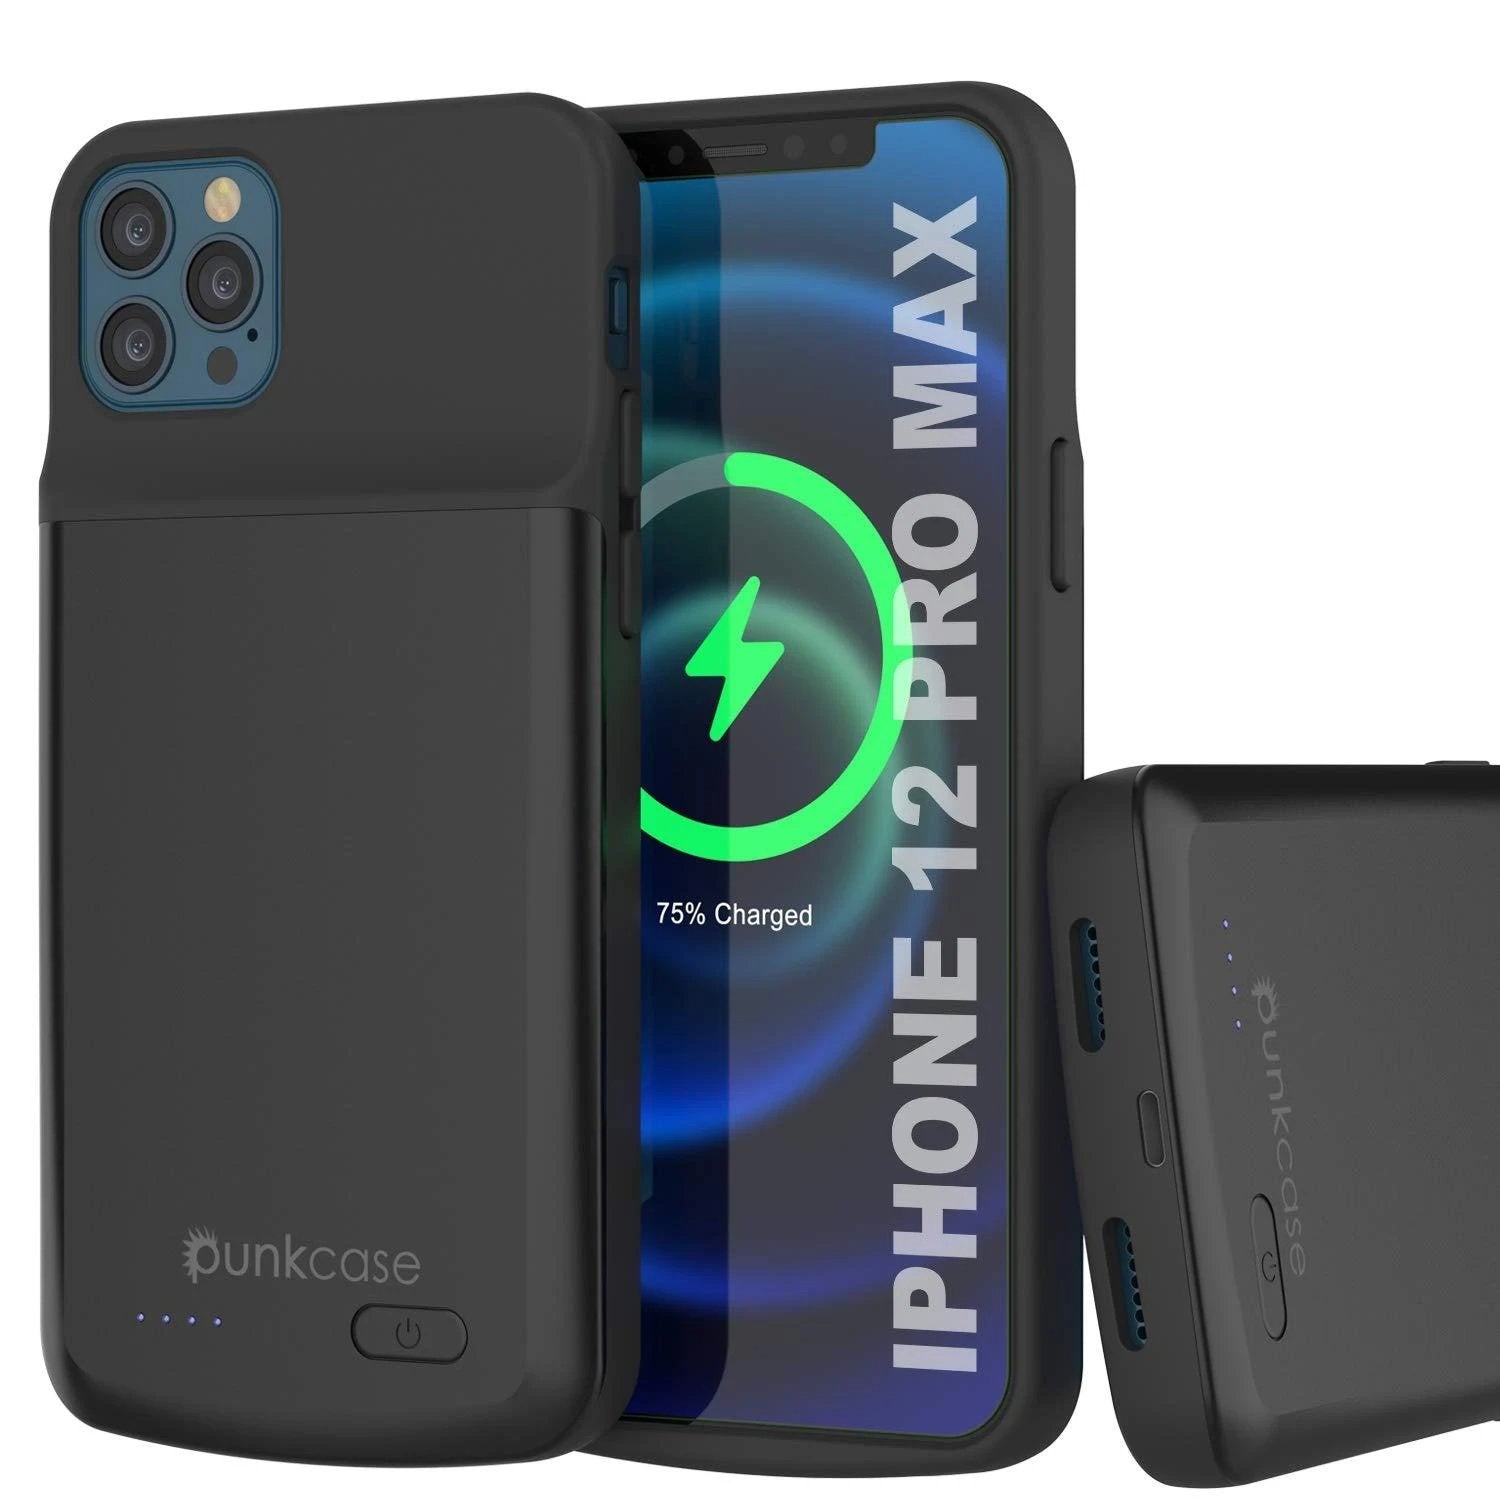 iPhone 12 Pro Max Battery Case, PunkJuice 4800mAH Fast Charging Power Bank W/ Screen Protector | [Black] (Color in image: black)